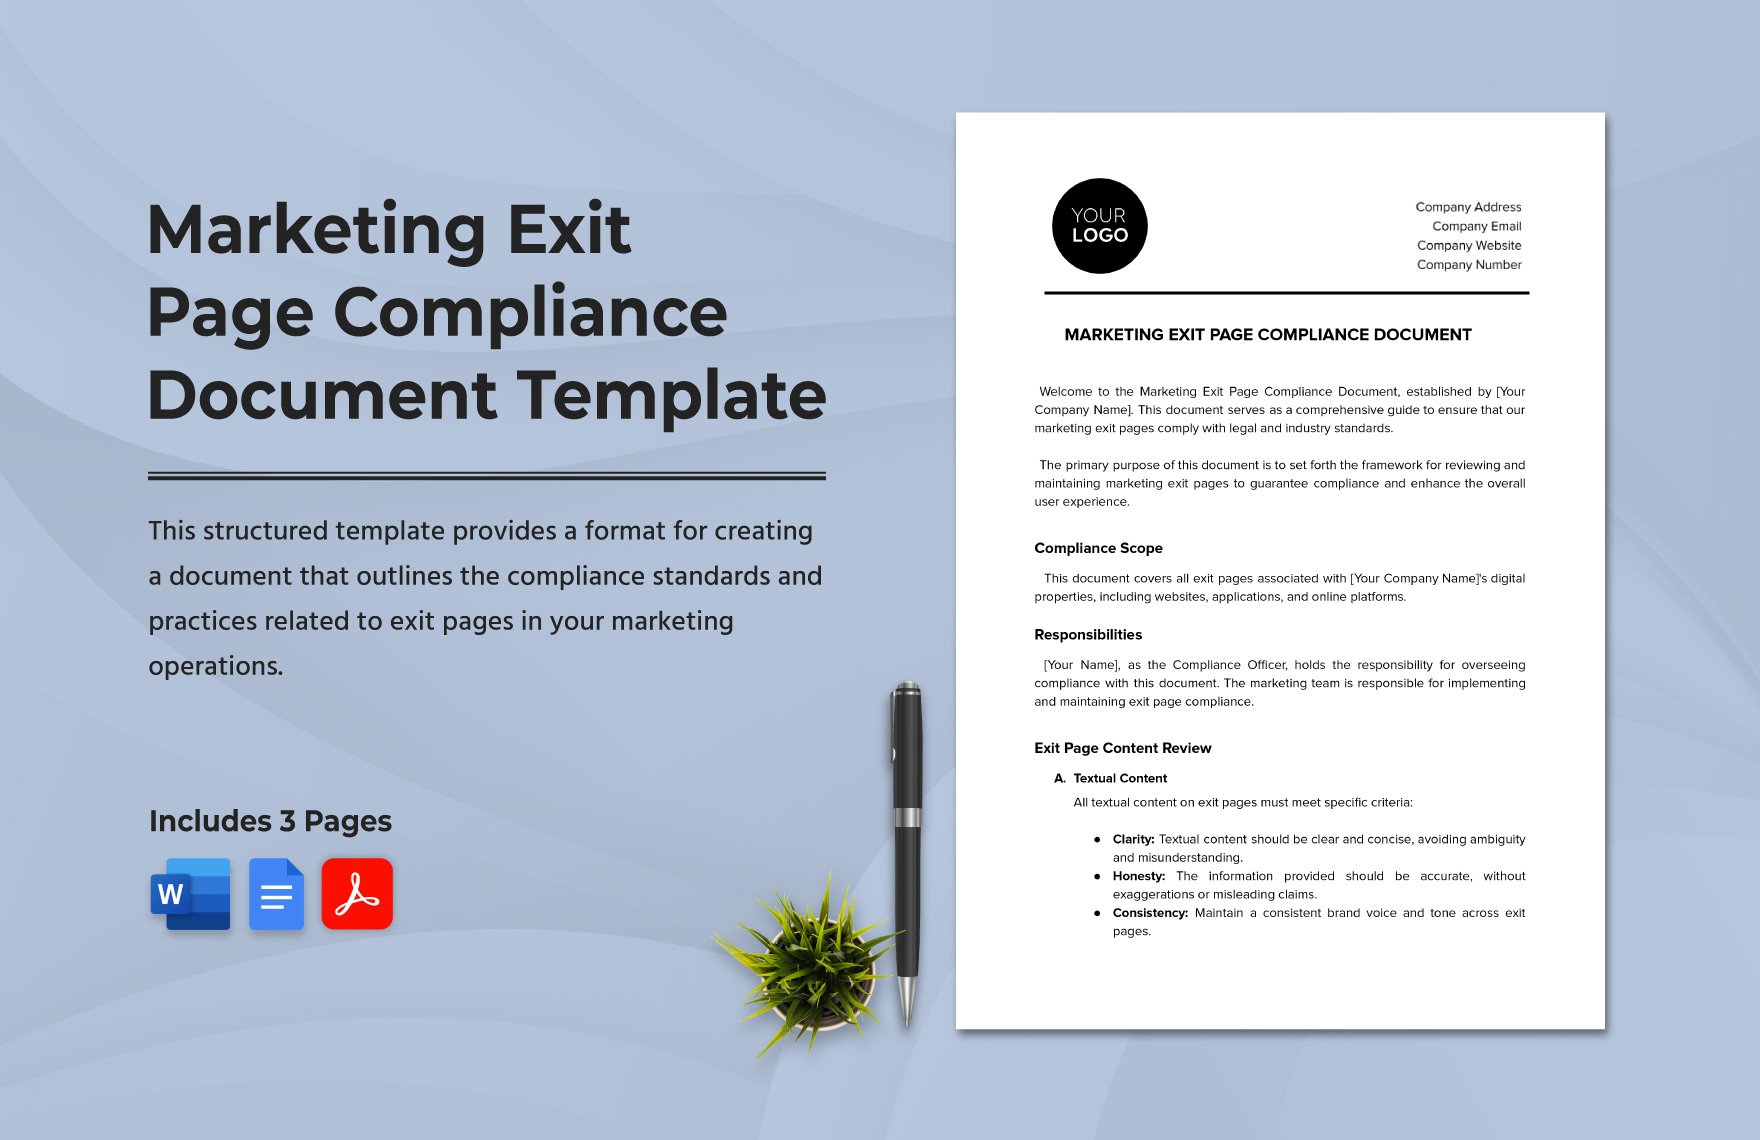 Marketing Exit Page Compliance Document Template